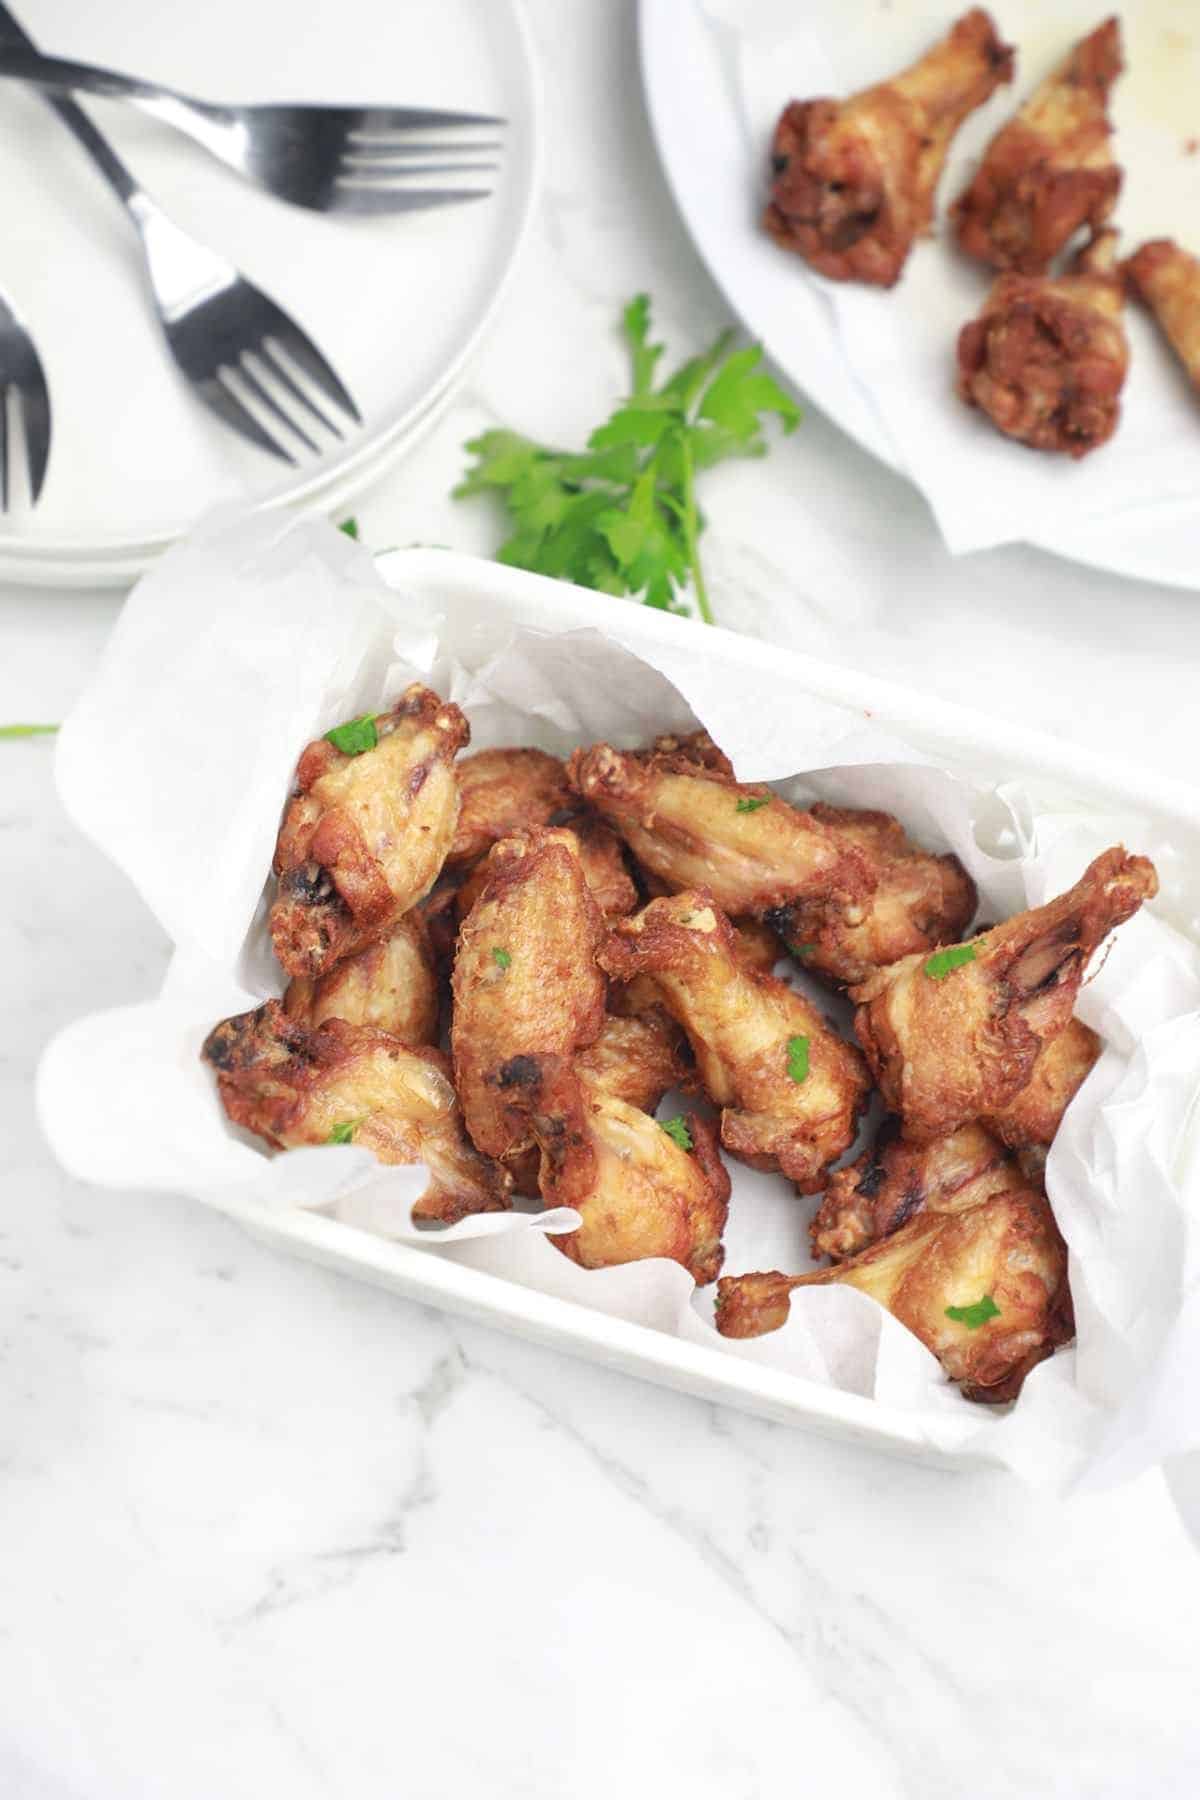 the cooked wings in a serving basket.